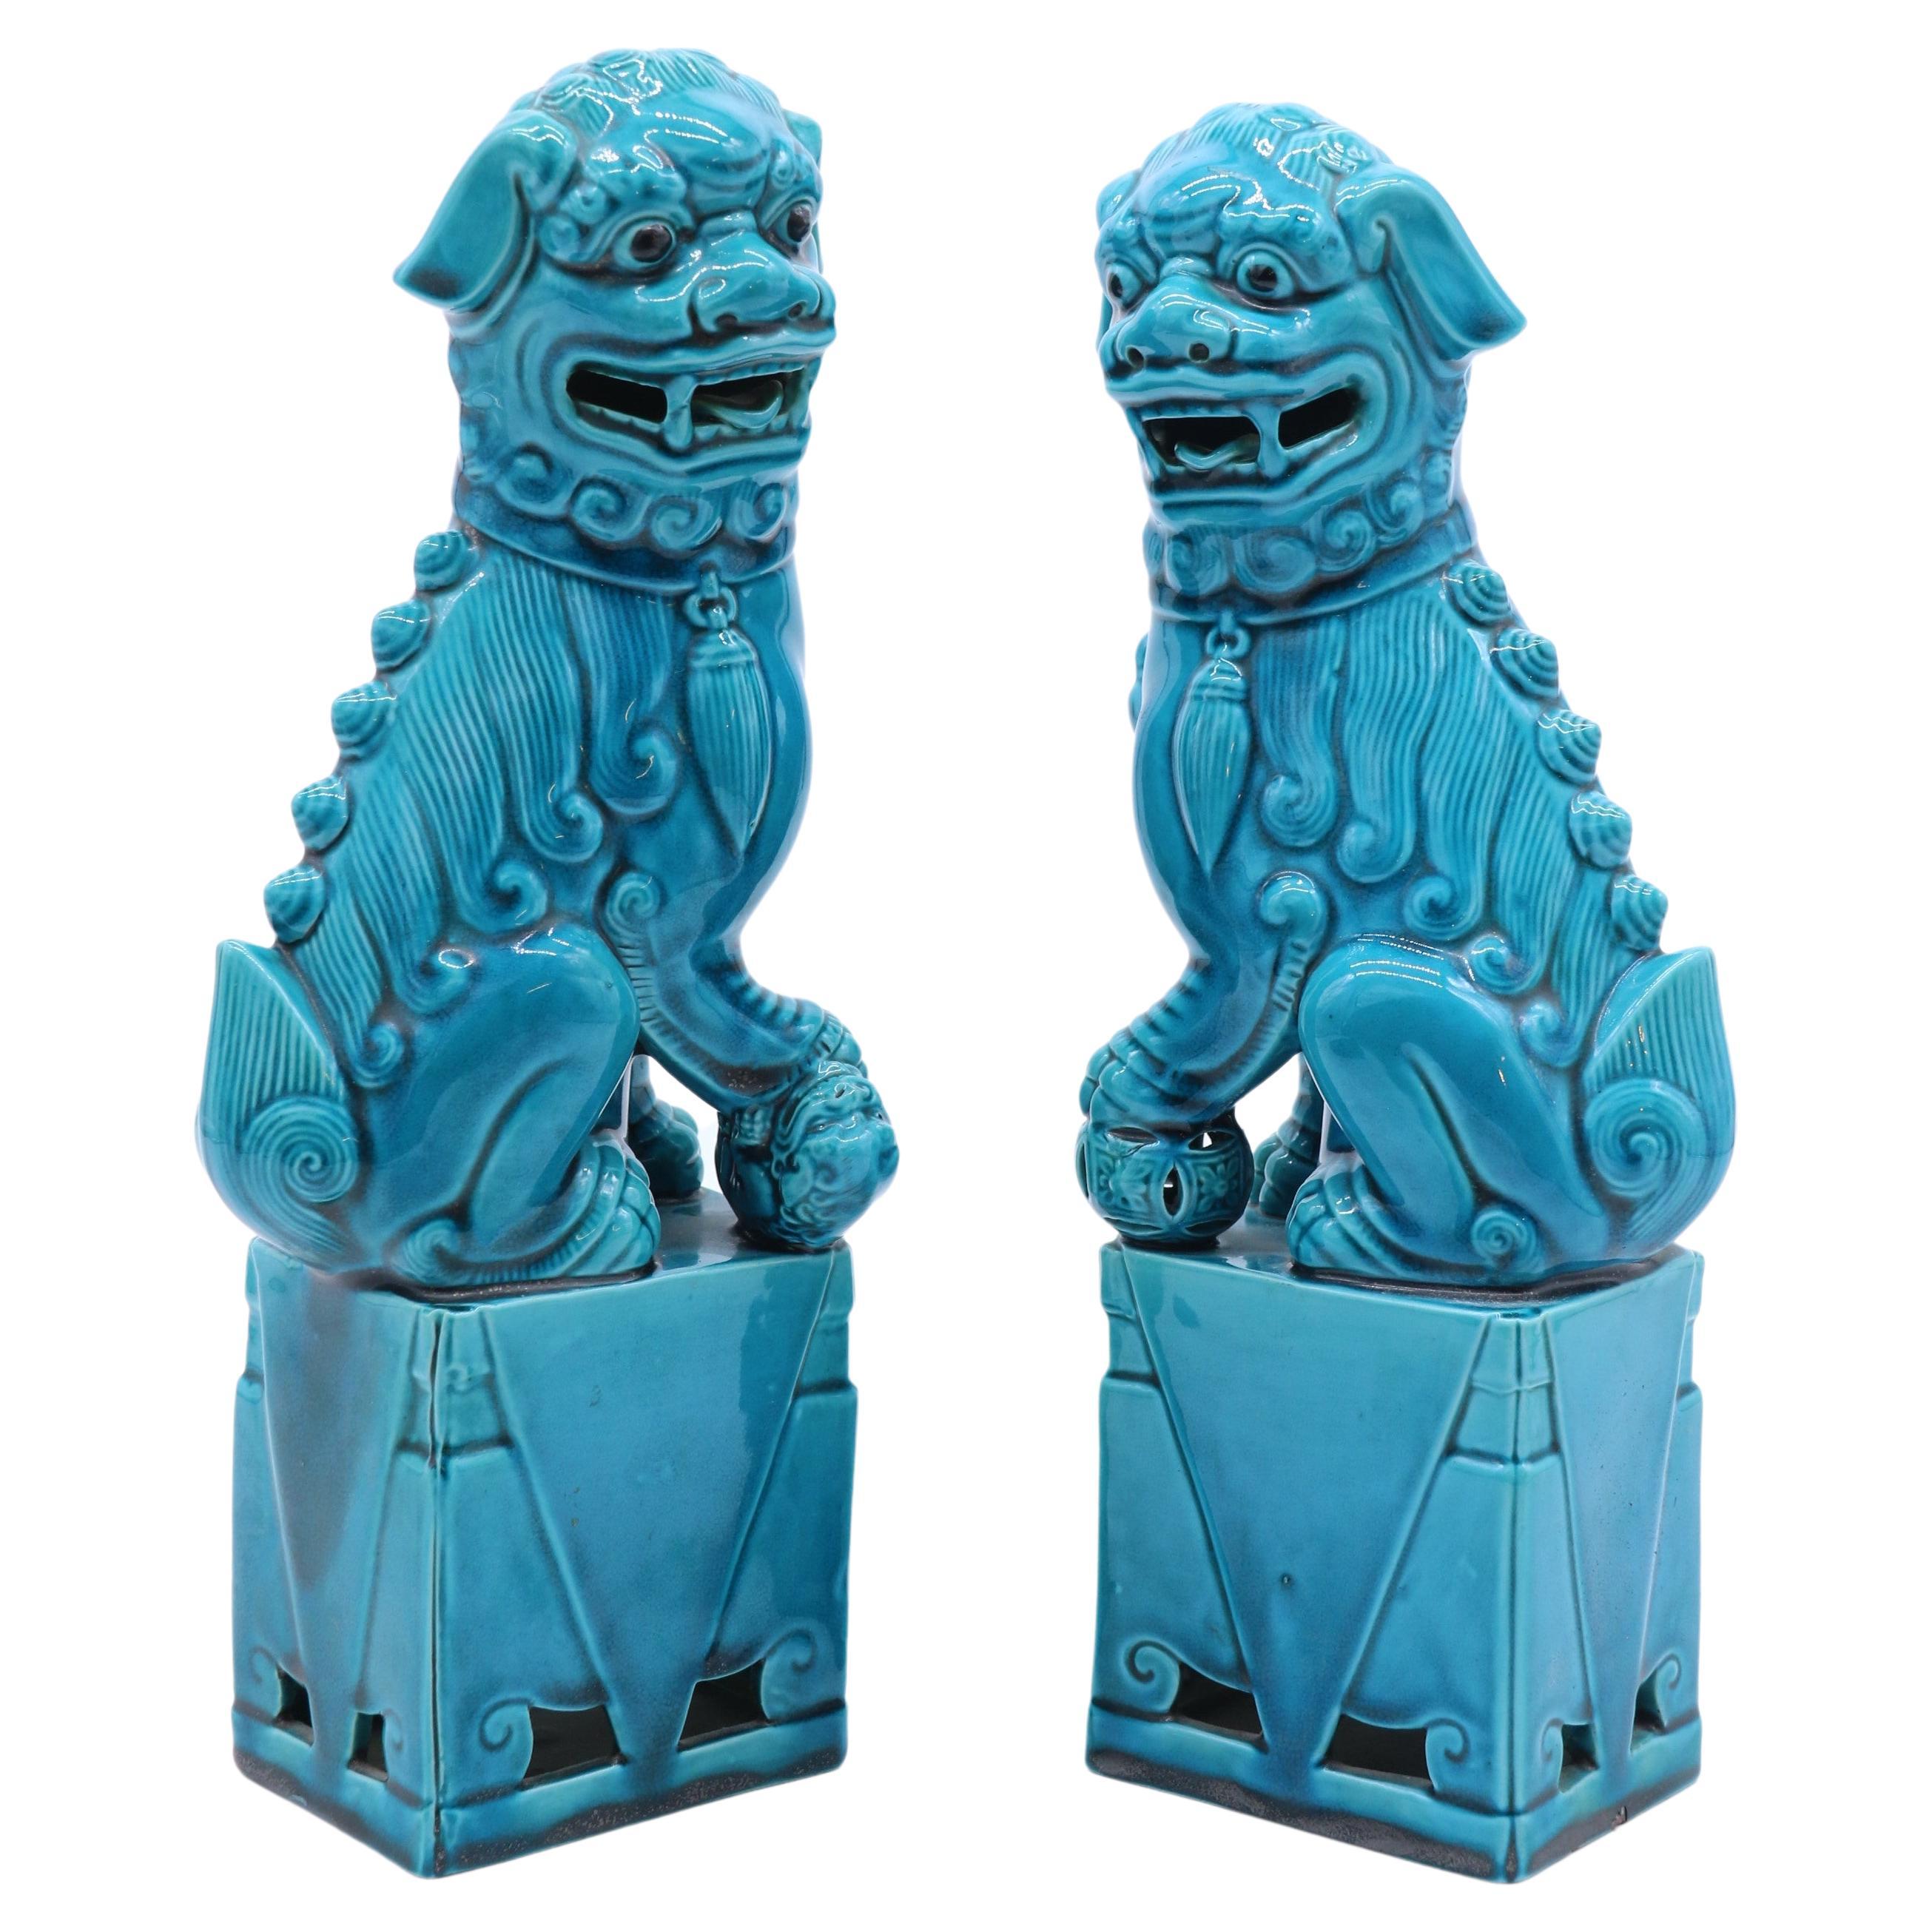 Pair of Porcelain Chinese Buddhist Temple Lions or Foo Dogs, circa 1900